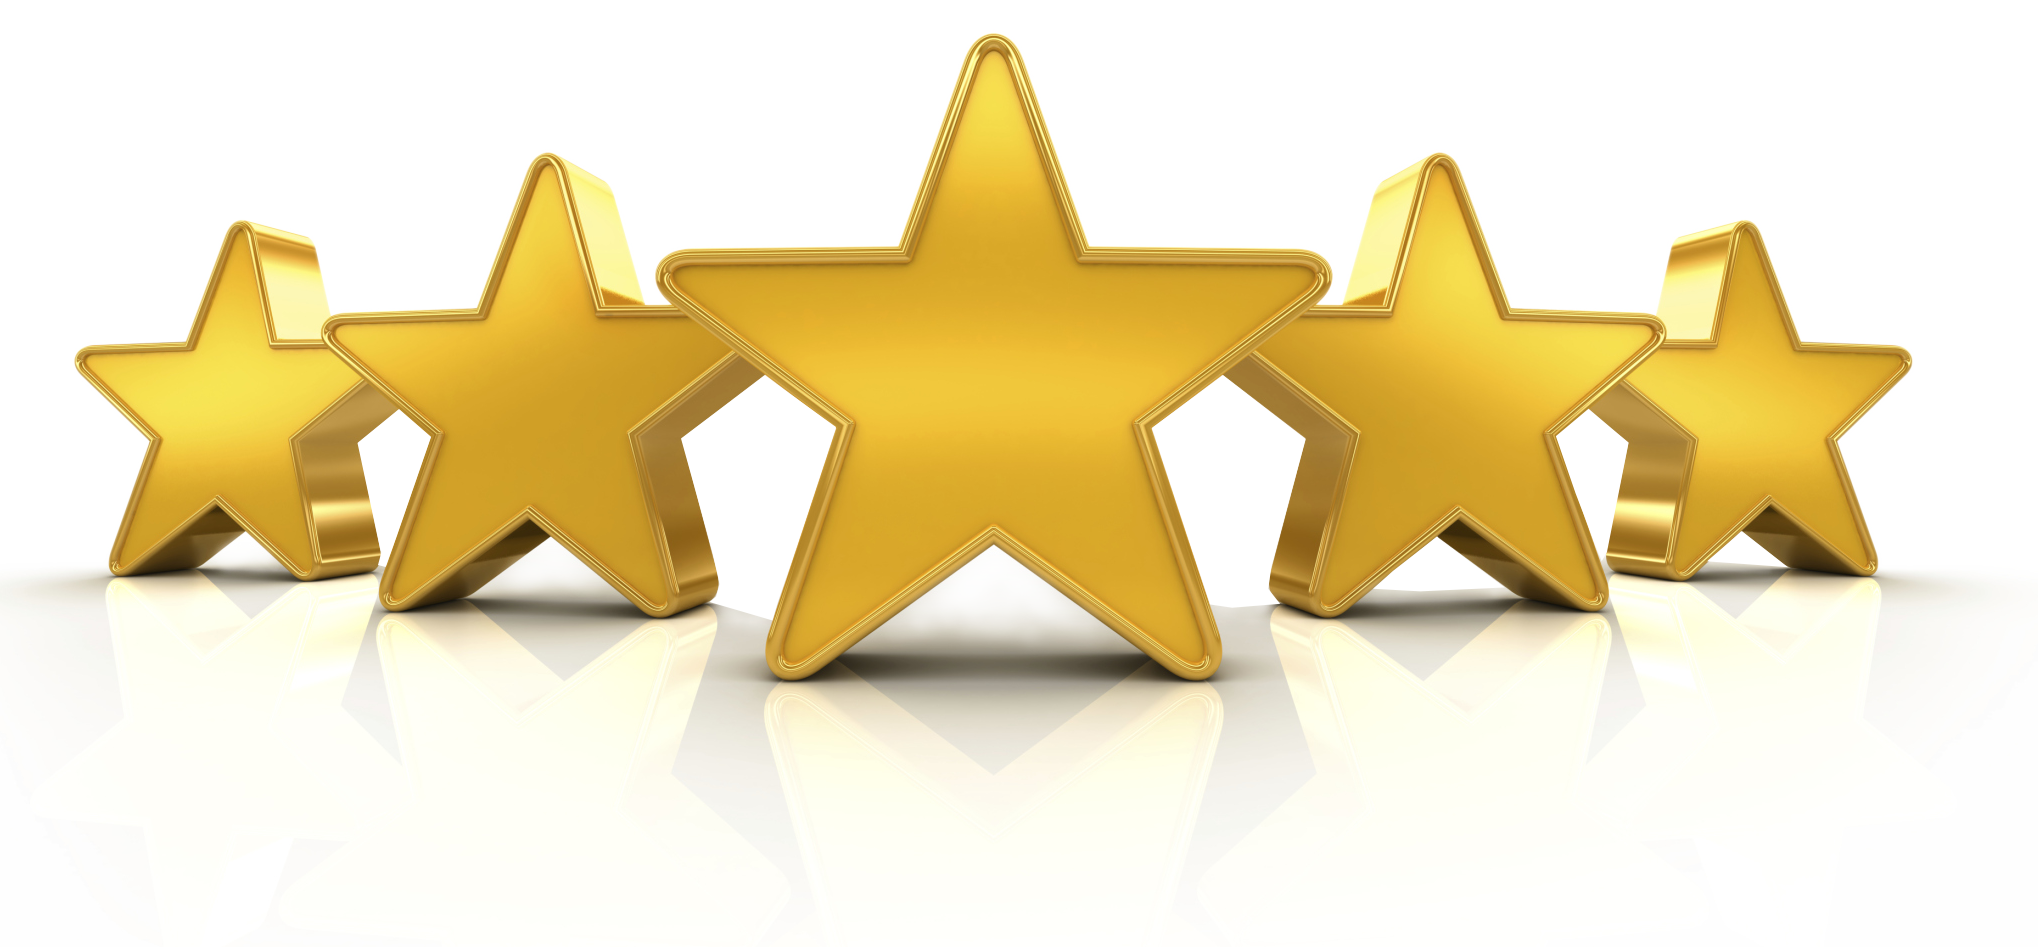 Essential Psychics​ 5 stars psychic review